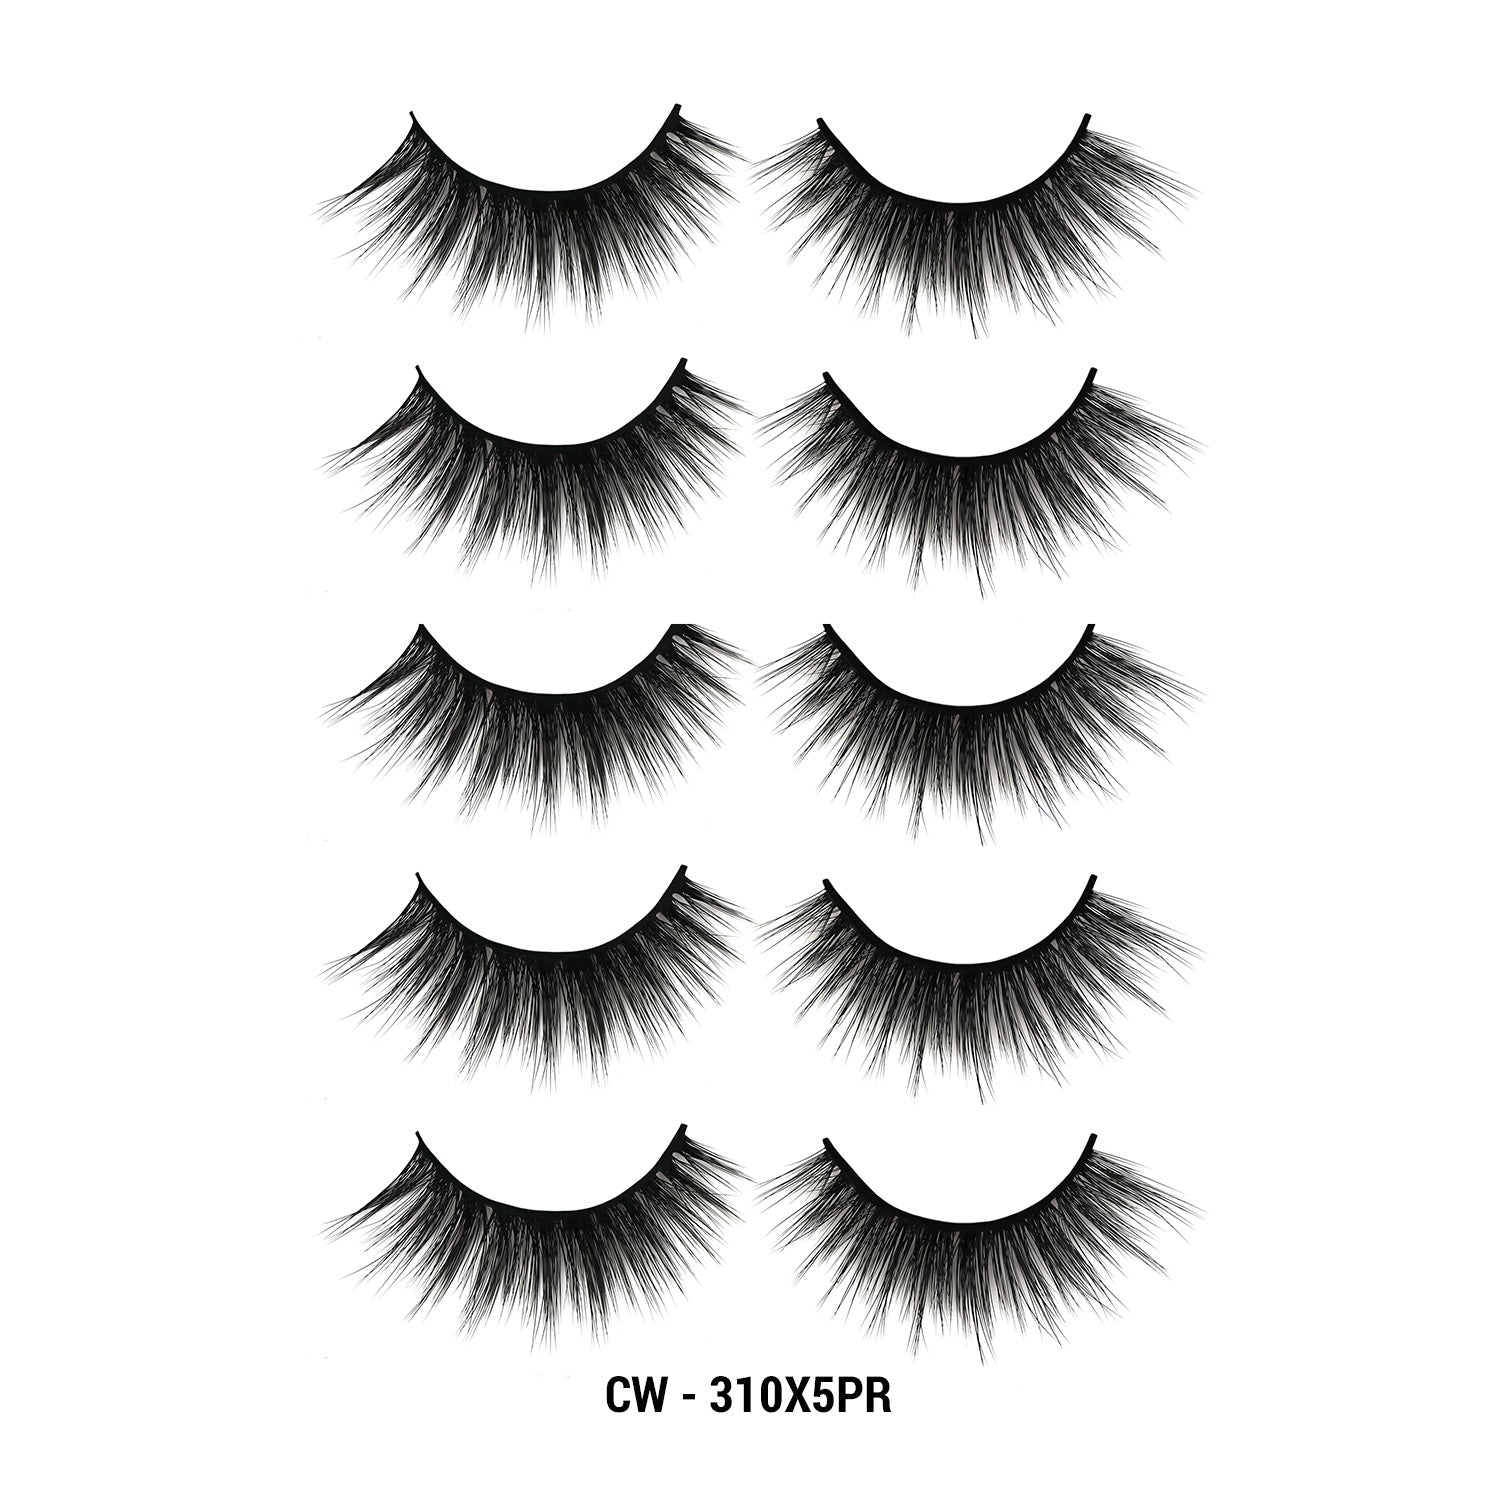 3D Cashmere Eyelashes Value Pack 5 Pairs (CW)